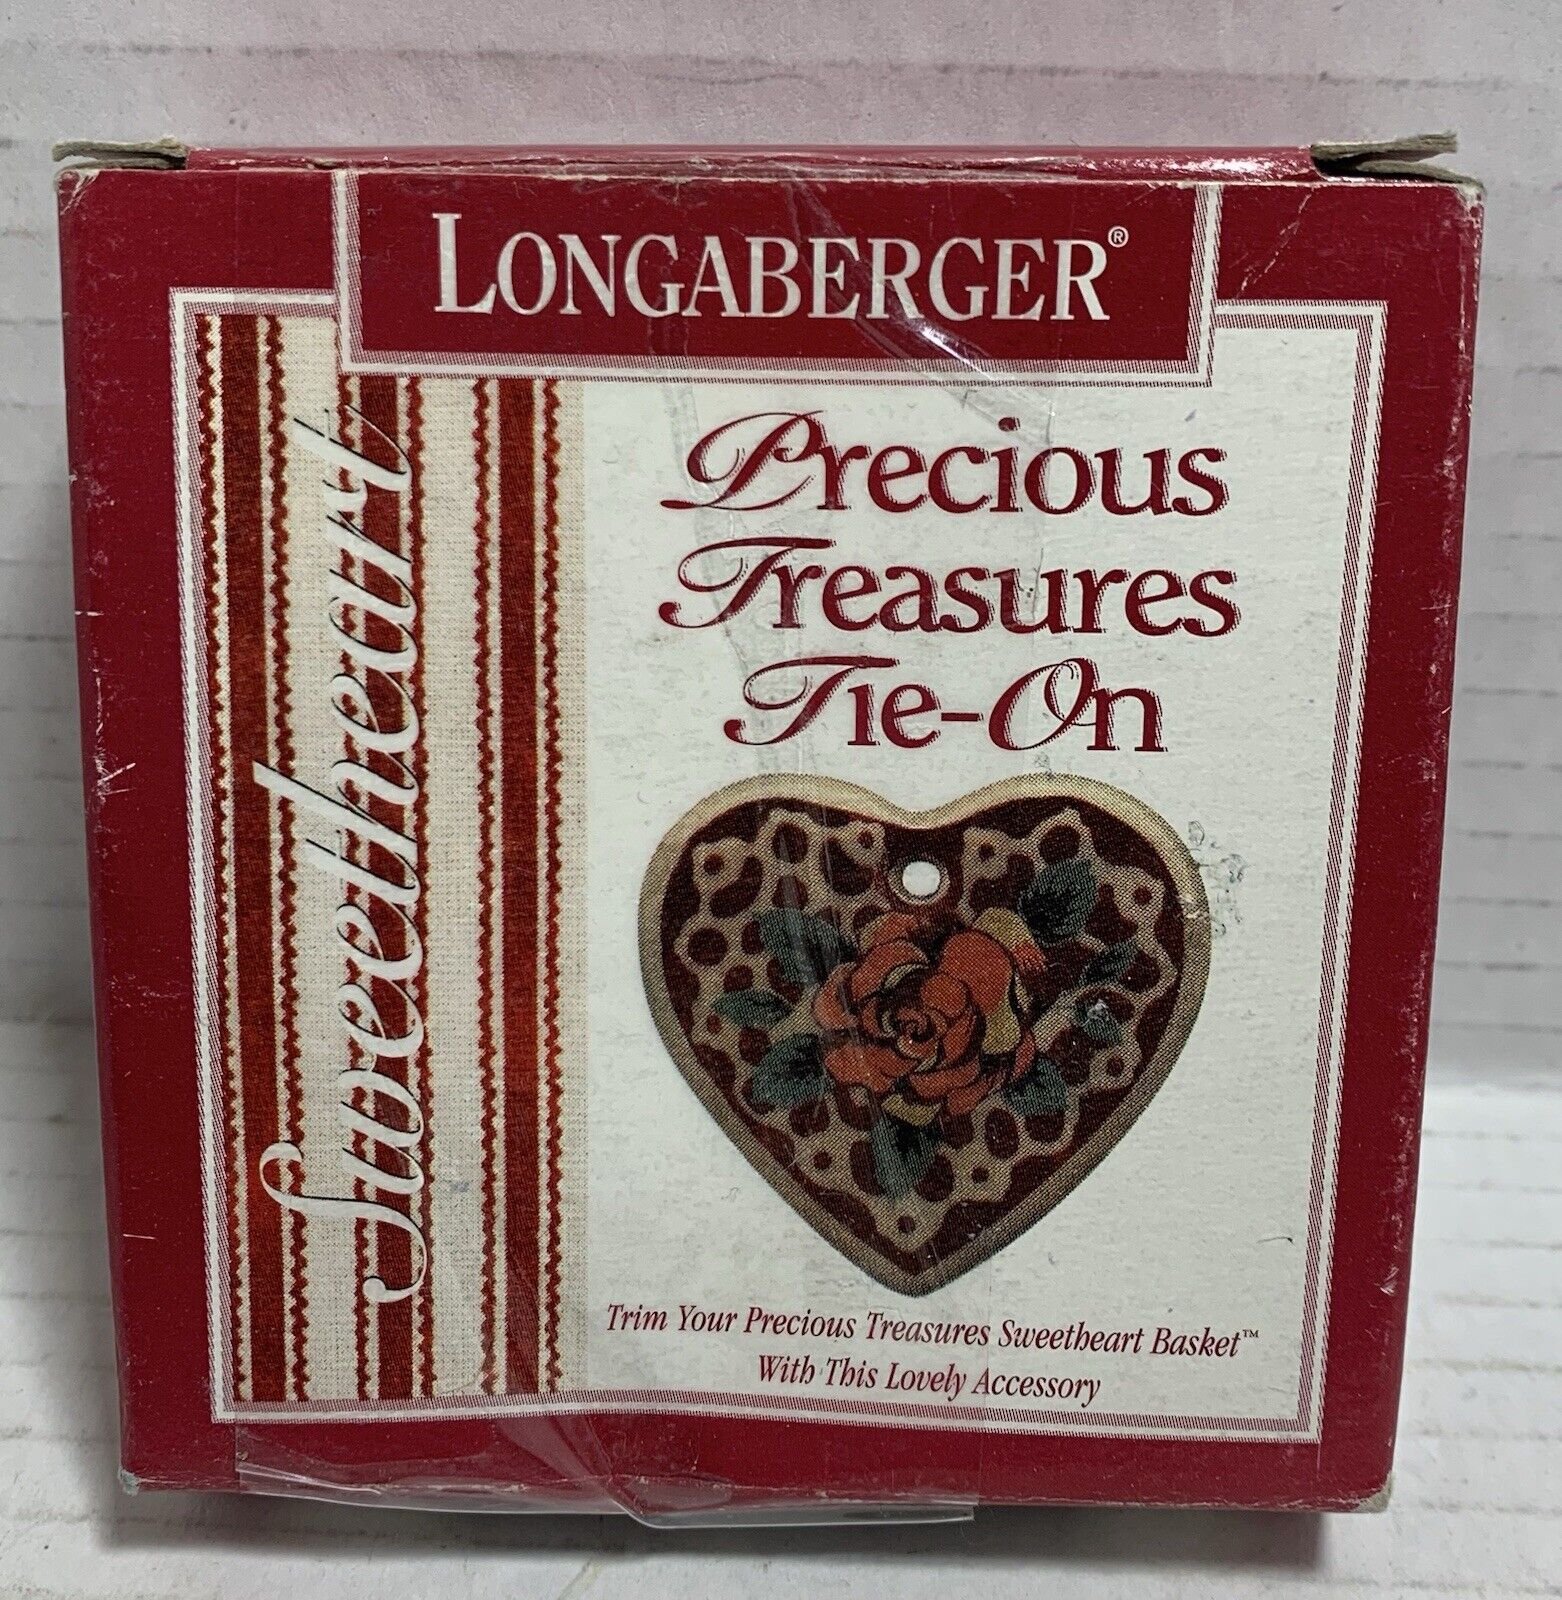 VTG Longaberger 1995 “Sweetheart”Tie On #31798 Heart With Pink Rose Discontinued